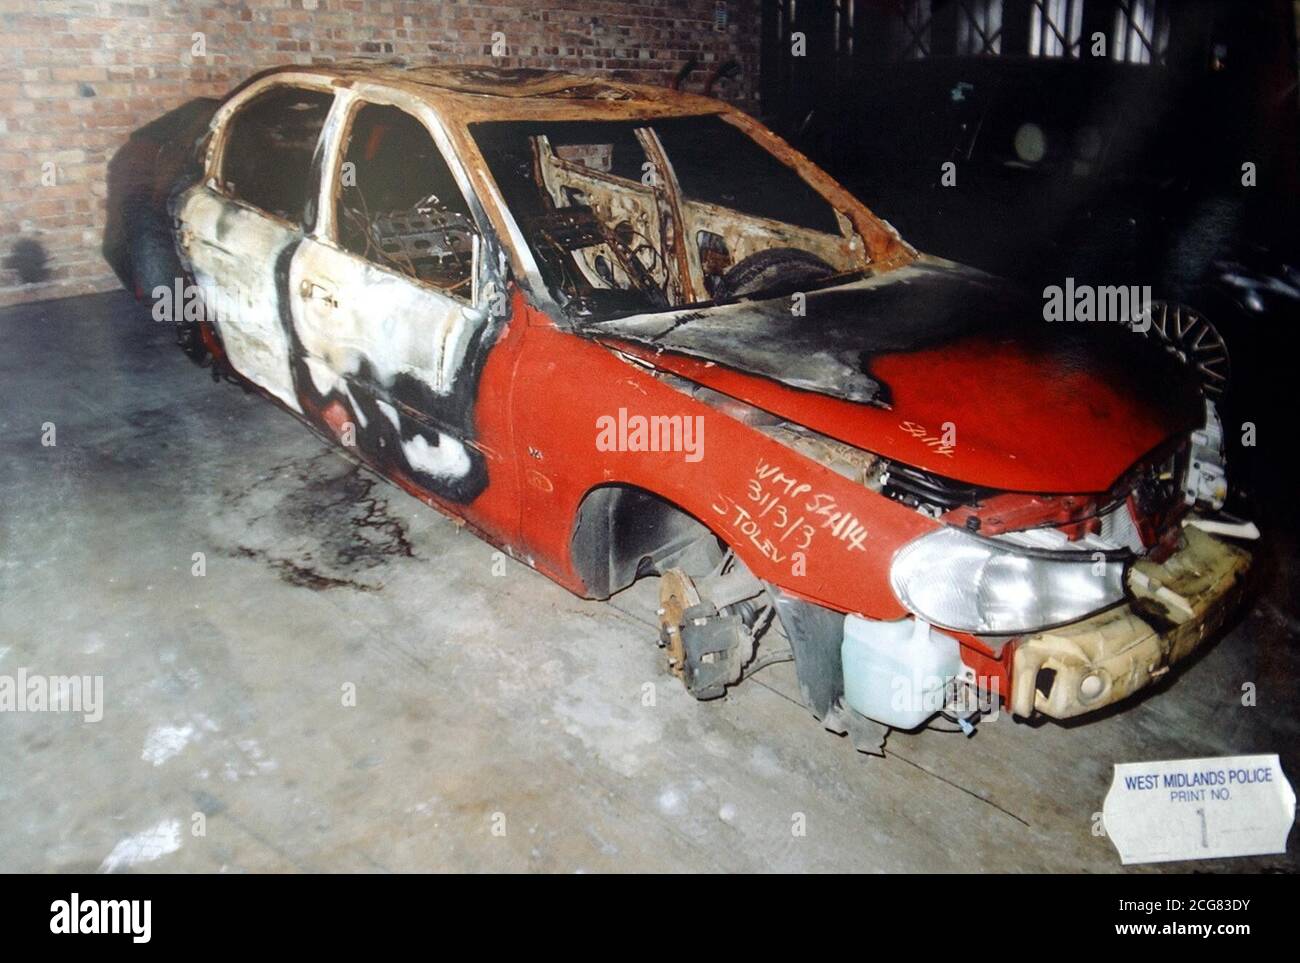 Collect image of the car used by the gunmen who murdered the two teenage friends Letisha Shakespeare, 17, and Charlene Ellis, 18, in Birmingham on January 2 as they celebrated at New Year.   * The red Ford Mondeo has been recovered, it has been revealed by the detective leading the investigation. Detective Superintendent Dave Mirfield, of West Midlands Police, said the burnt-out red Ford Mondeo was found with two shell casings used in the weapon which shot dead the two girls. Stock Photo